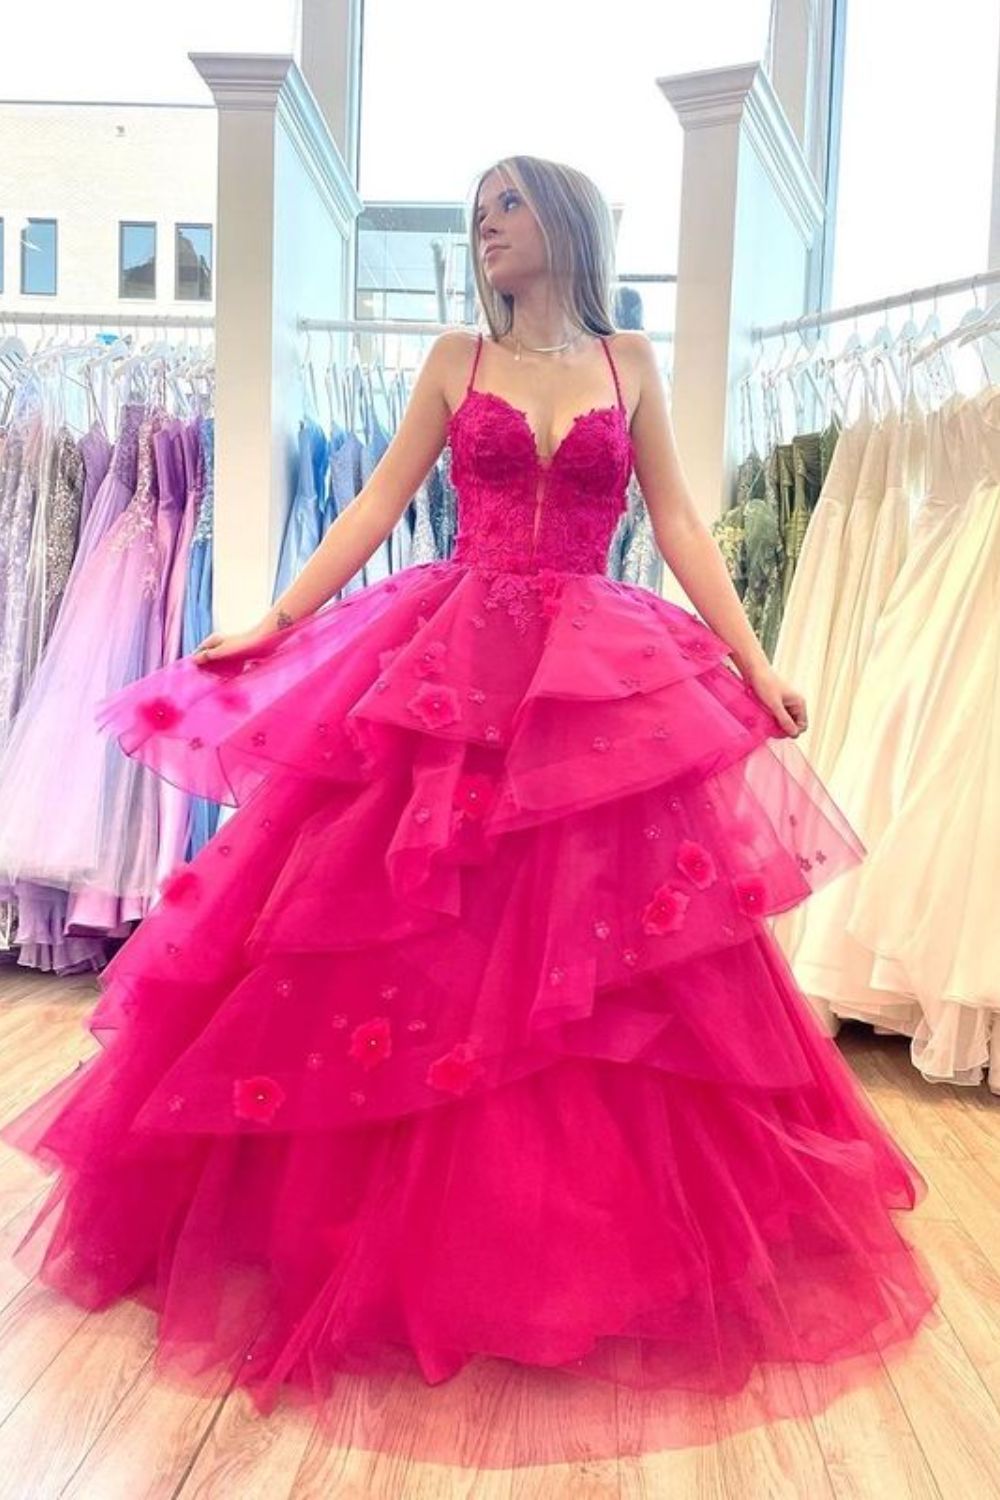 Dressime A Line Spaghetti Straps Tulle Tiered Long Prom Dress With Appliques